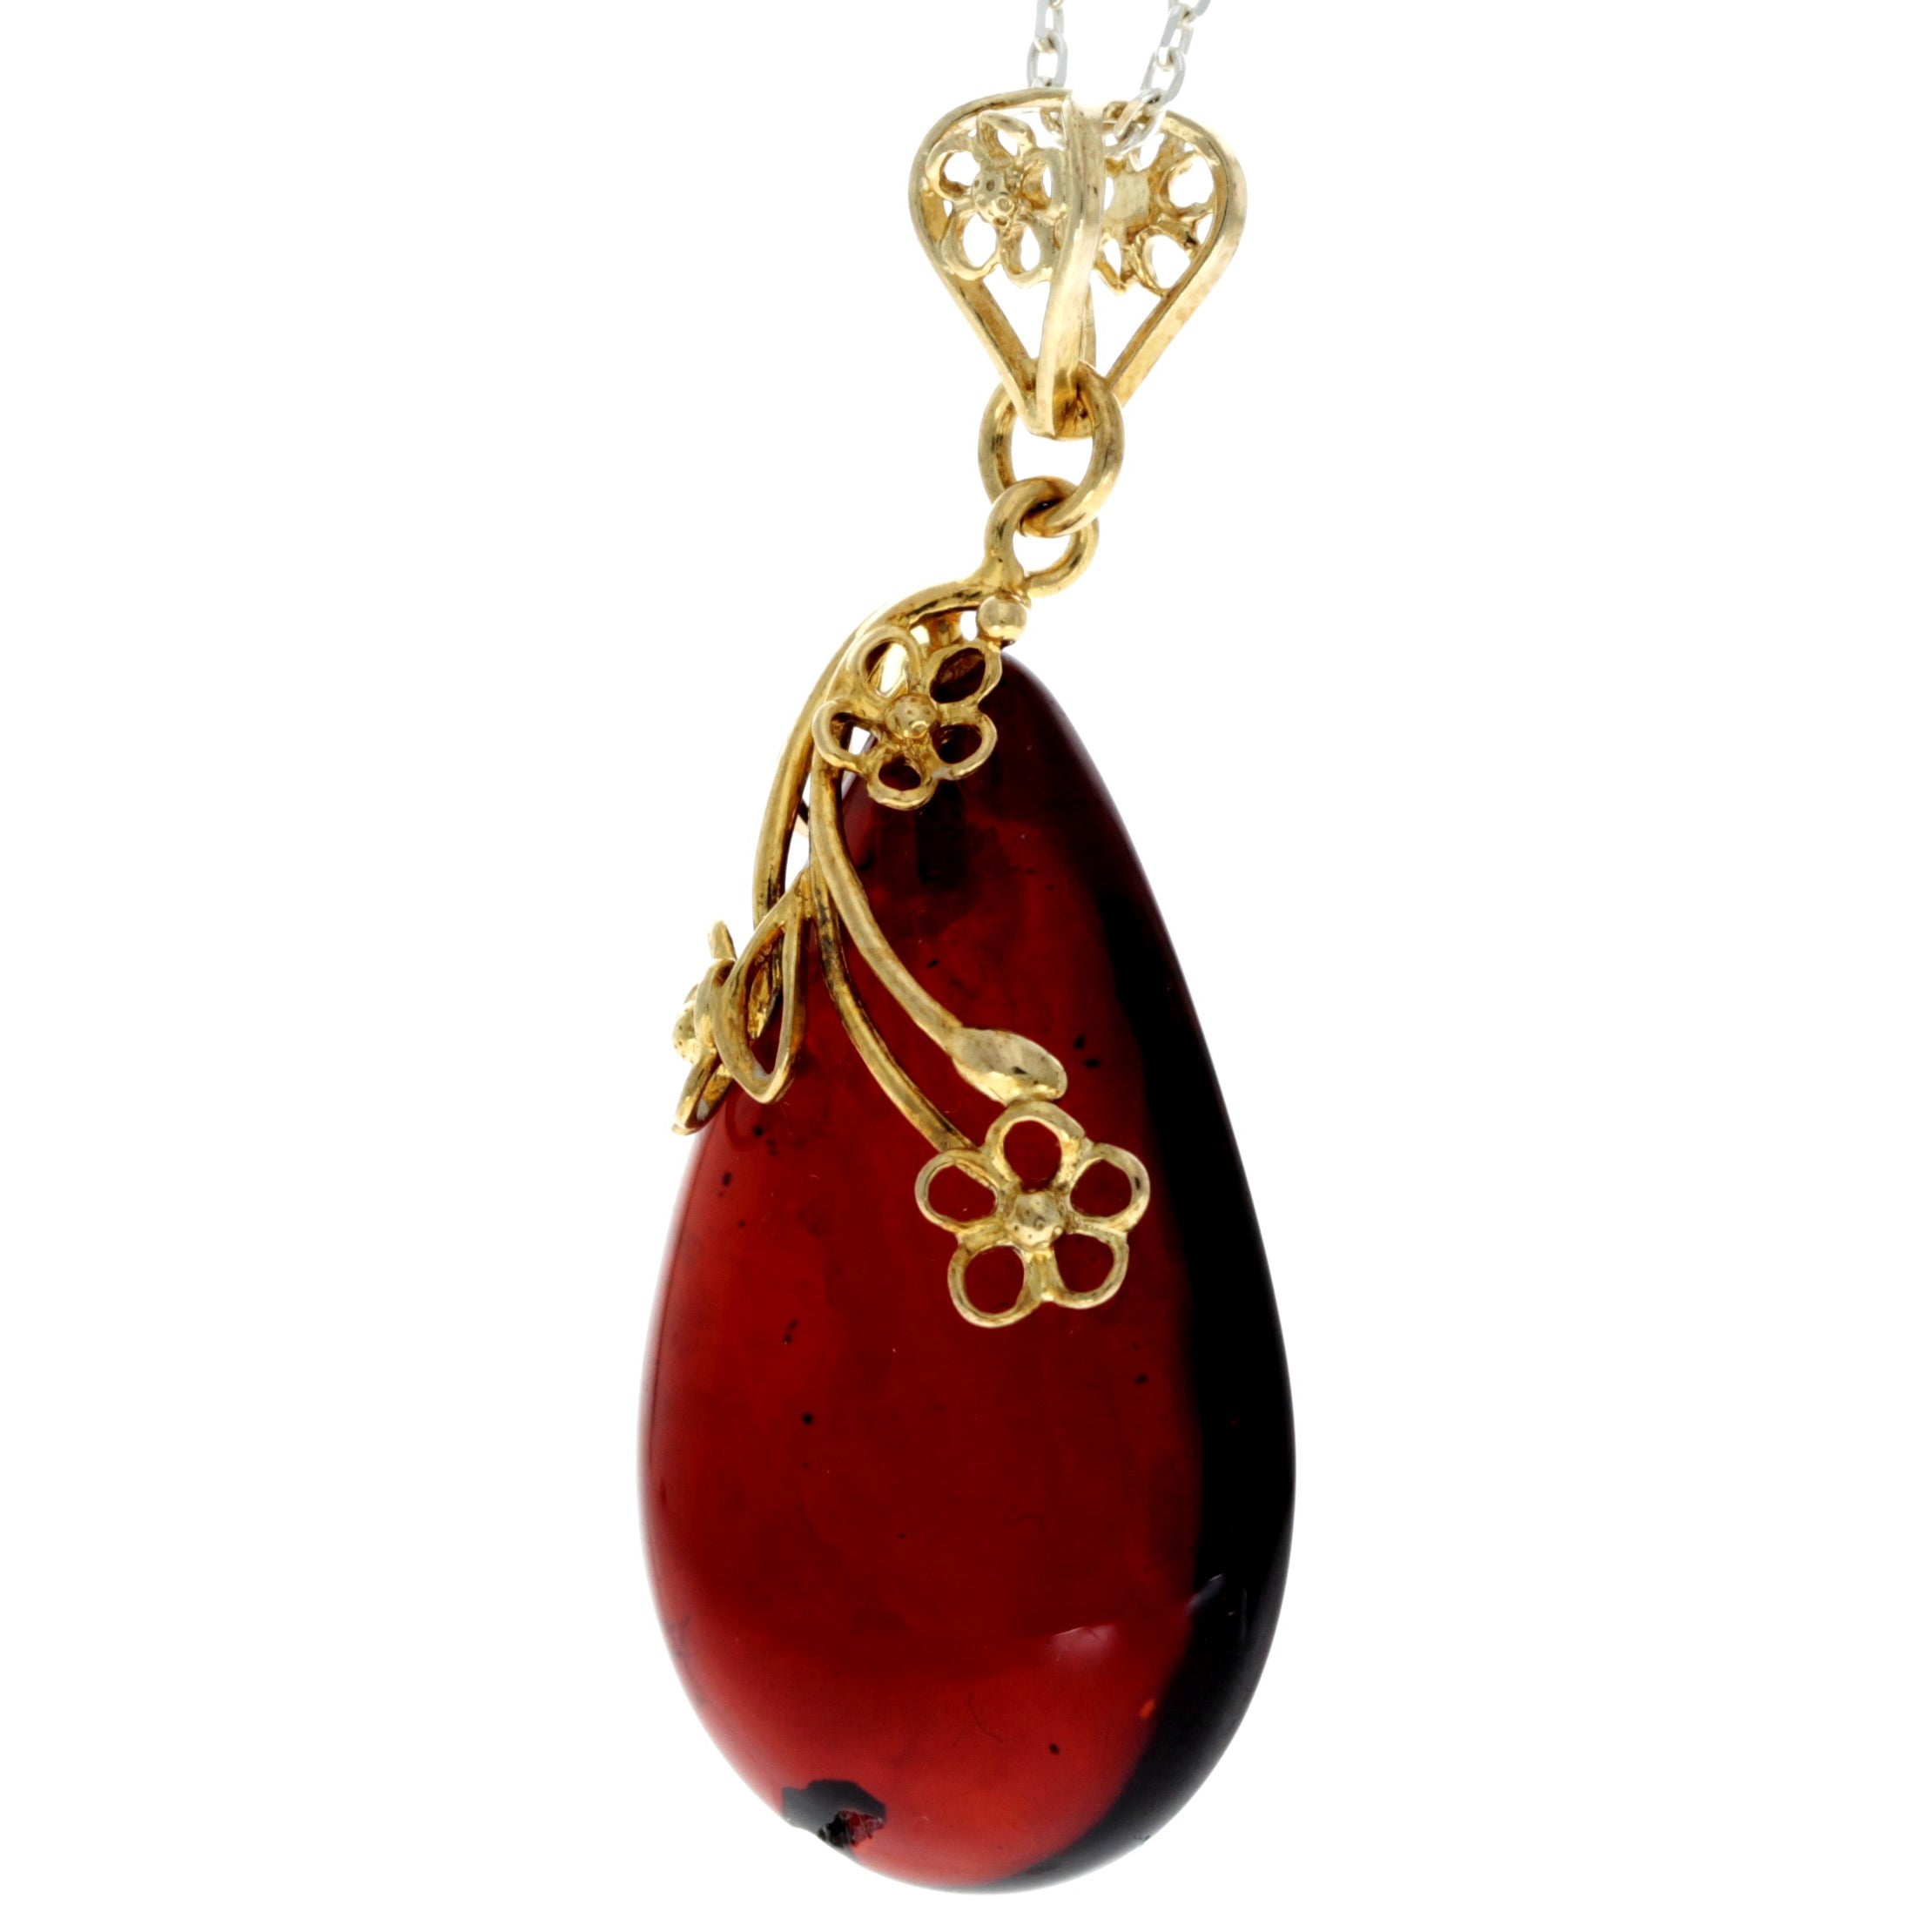 925 Sterling Silver Gold Plated with 14 ct Gold & Genuine Cherry Baltic Amber Exclusive Unique Pendant - GPD004